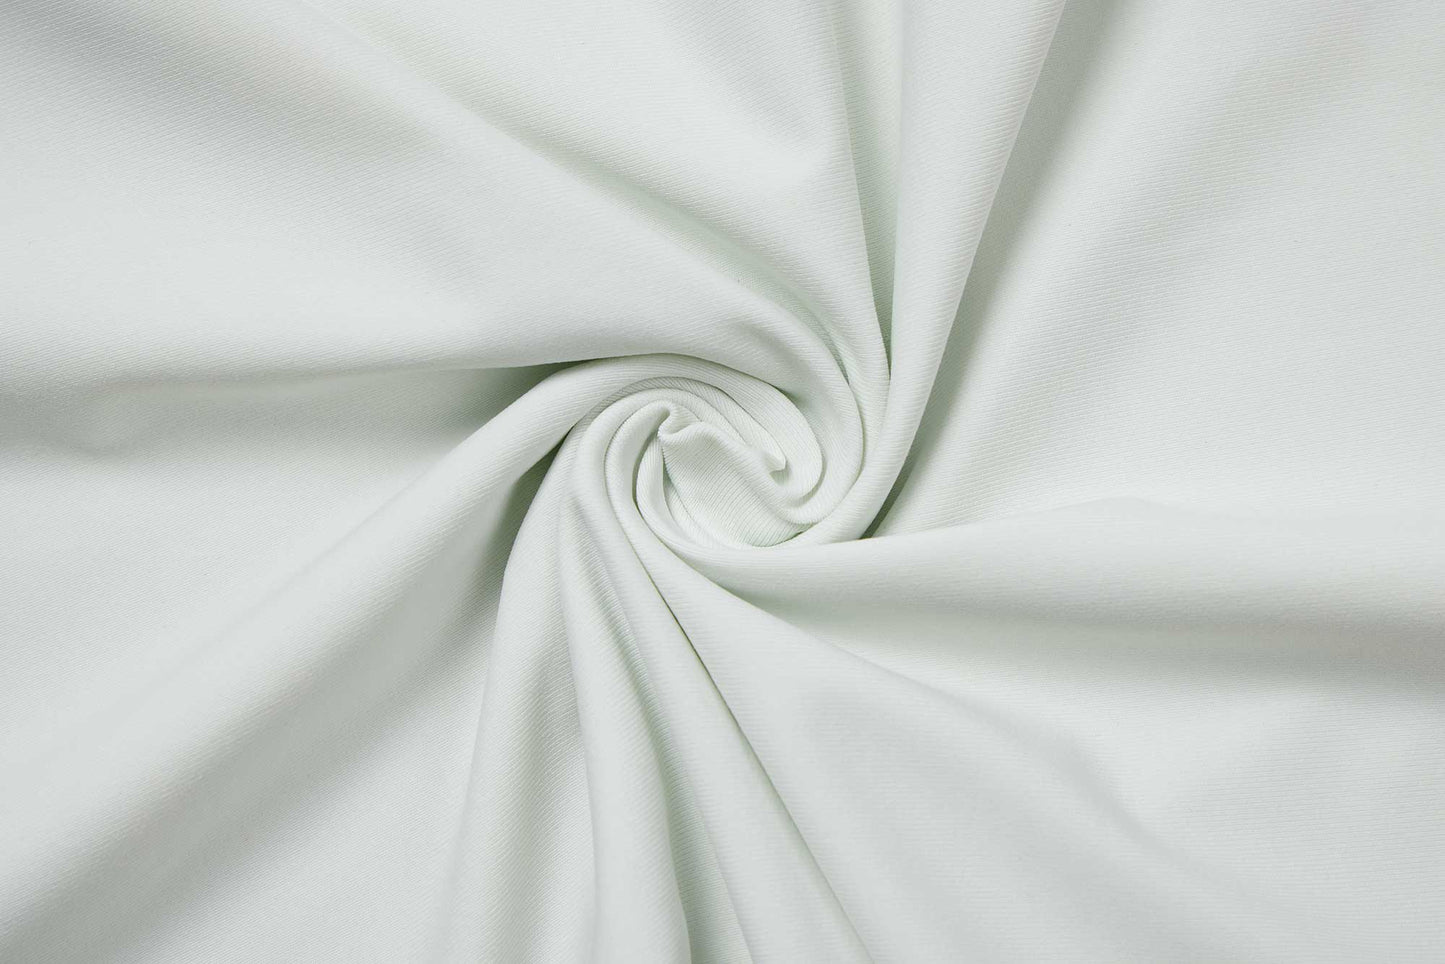 Fabric details of white tank